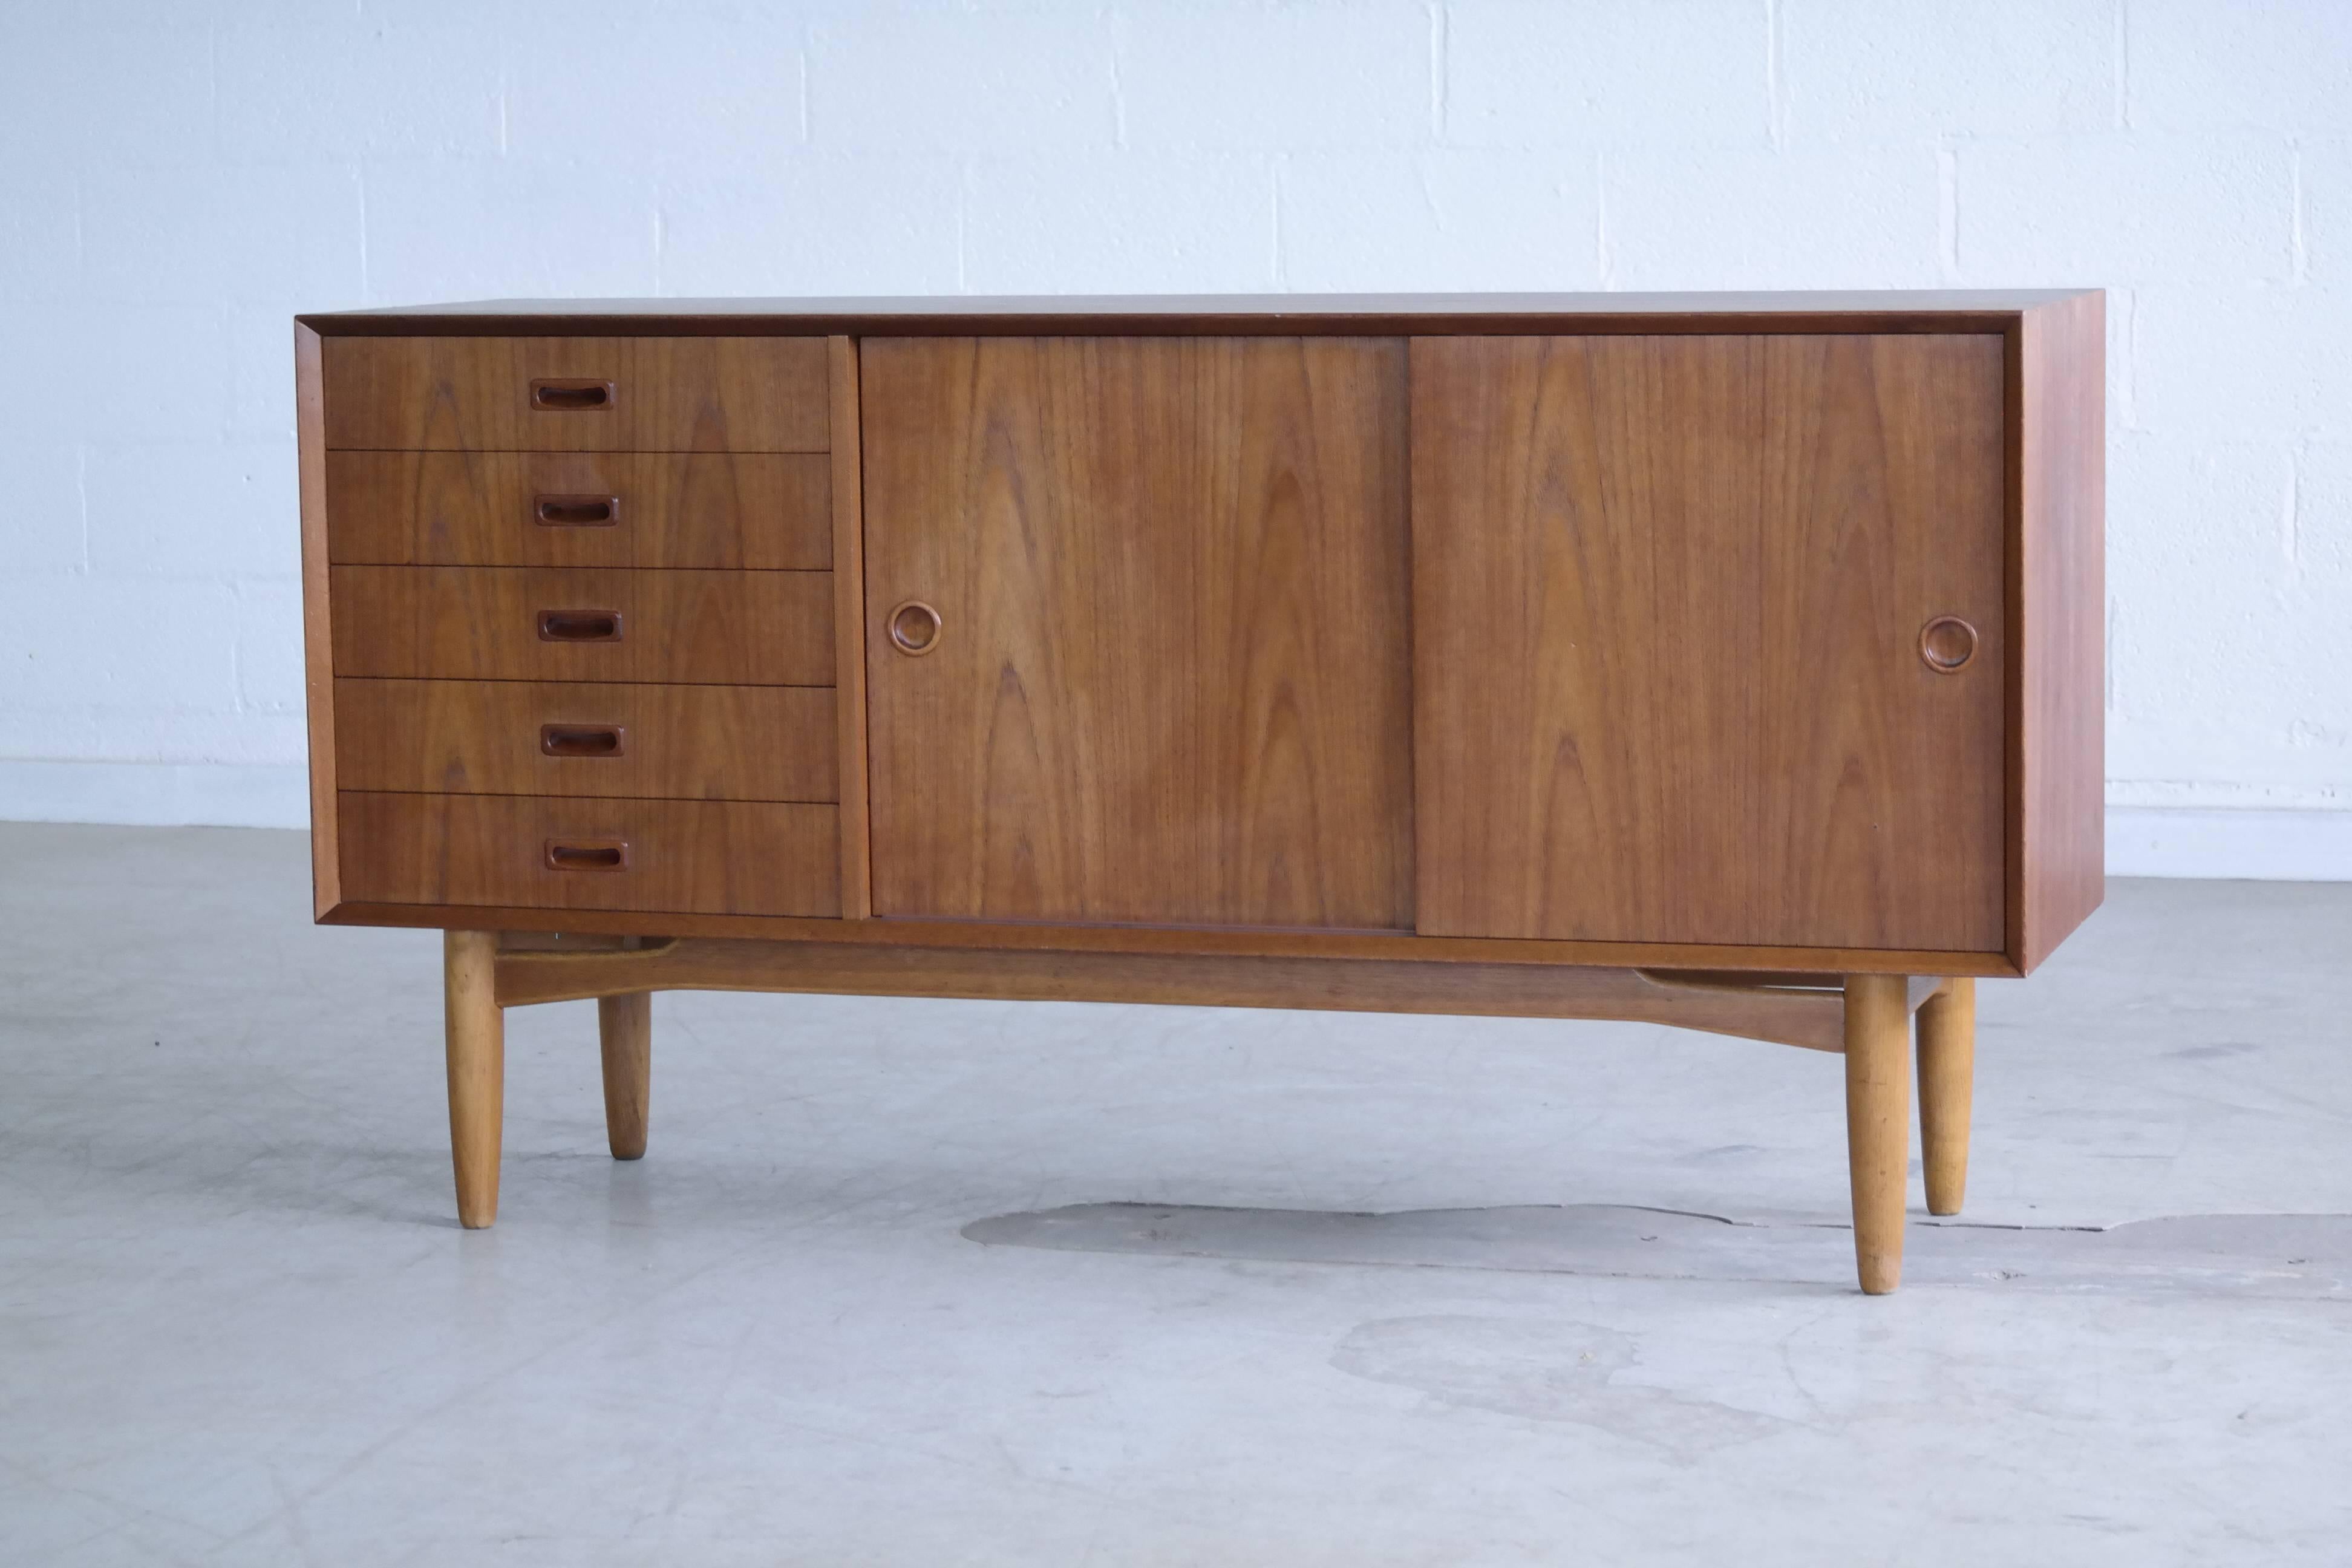 Mid century classic Omann Jun design and quality. This Low teak credenza with carved pulls on a base of solid oak provides lots of storage space and packs a punch for its size.